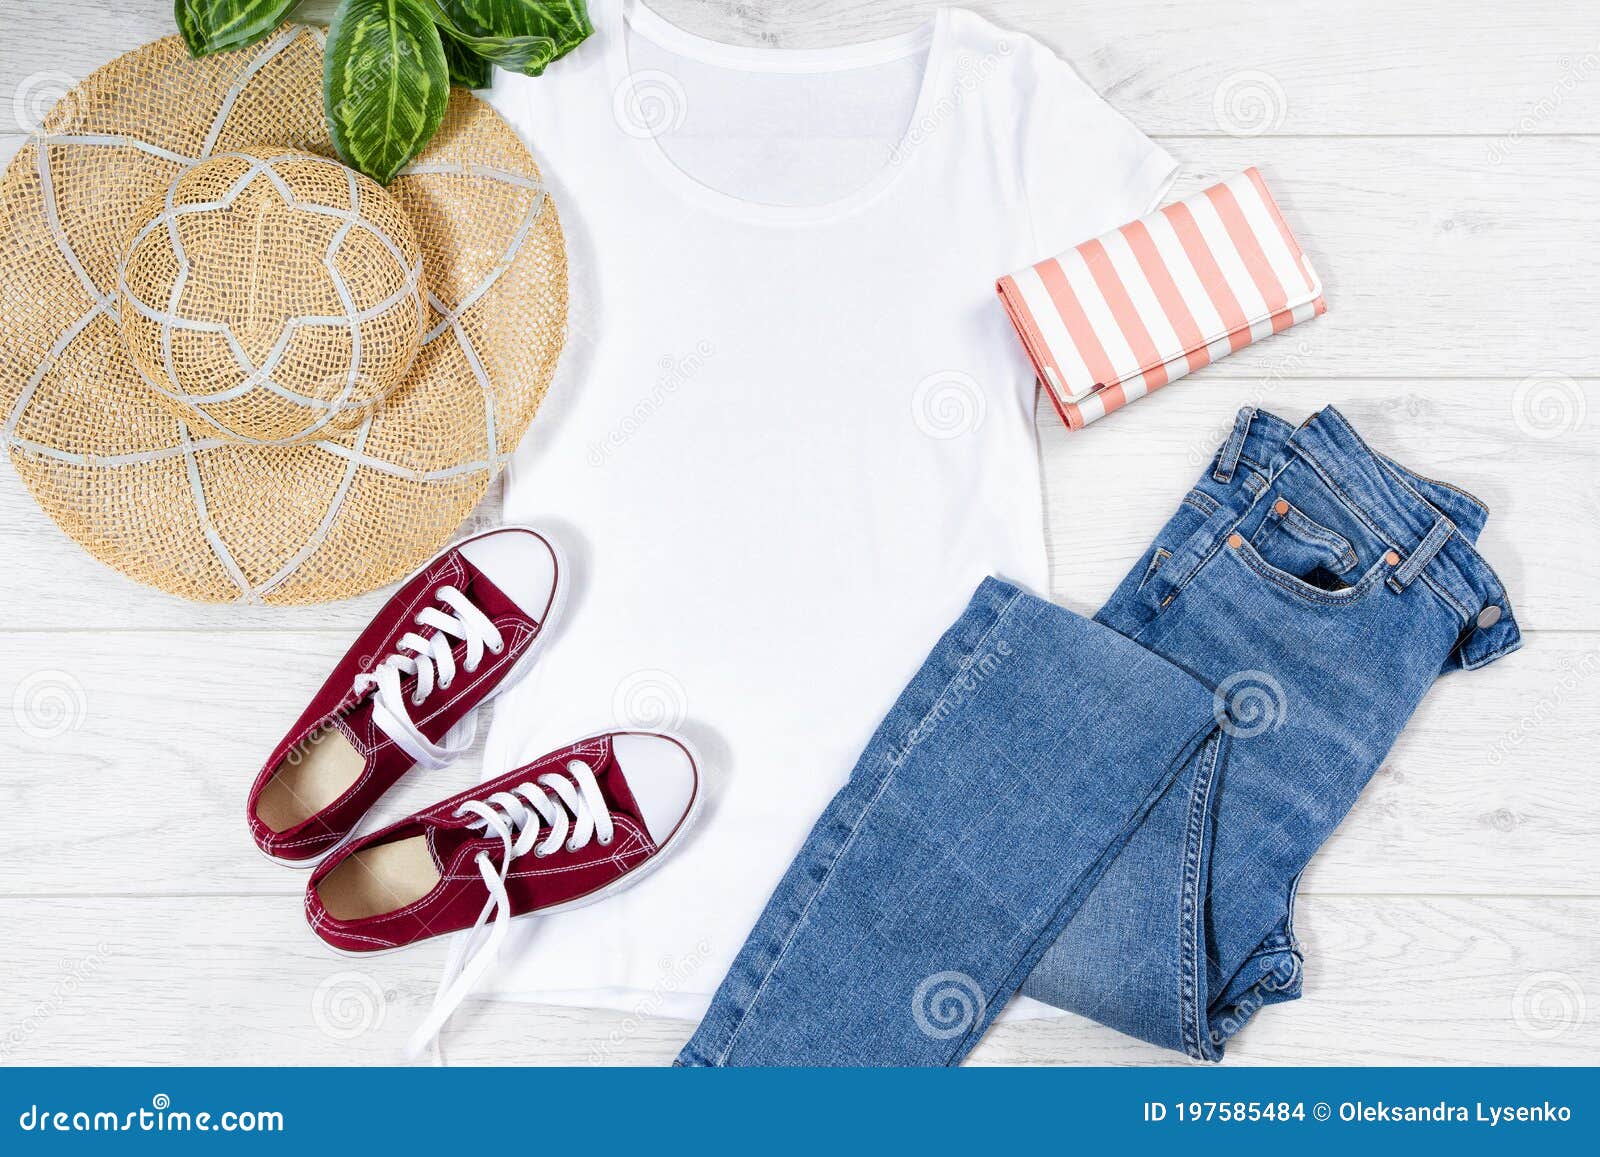 T Shirt White and Sneakers. T-shirt Mockup Flat Lay with Summer ...